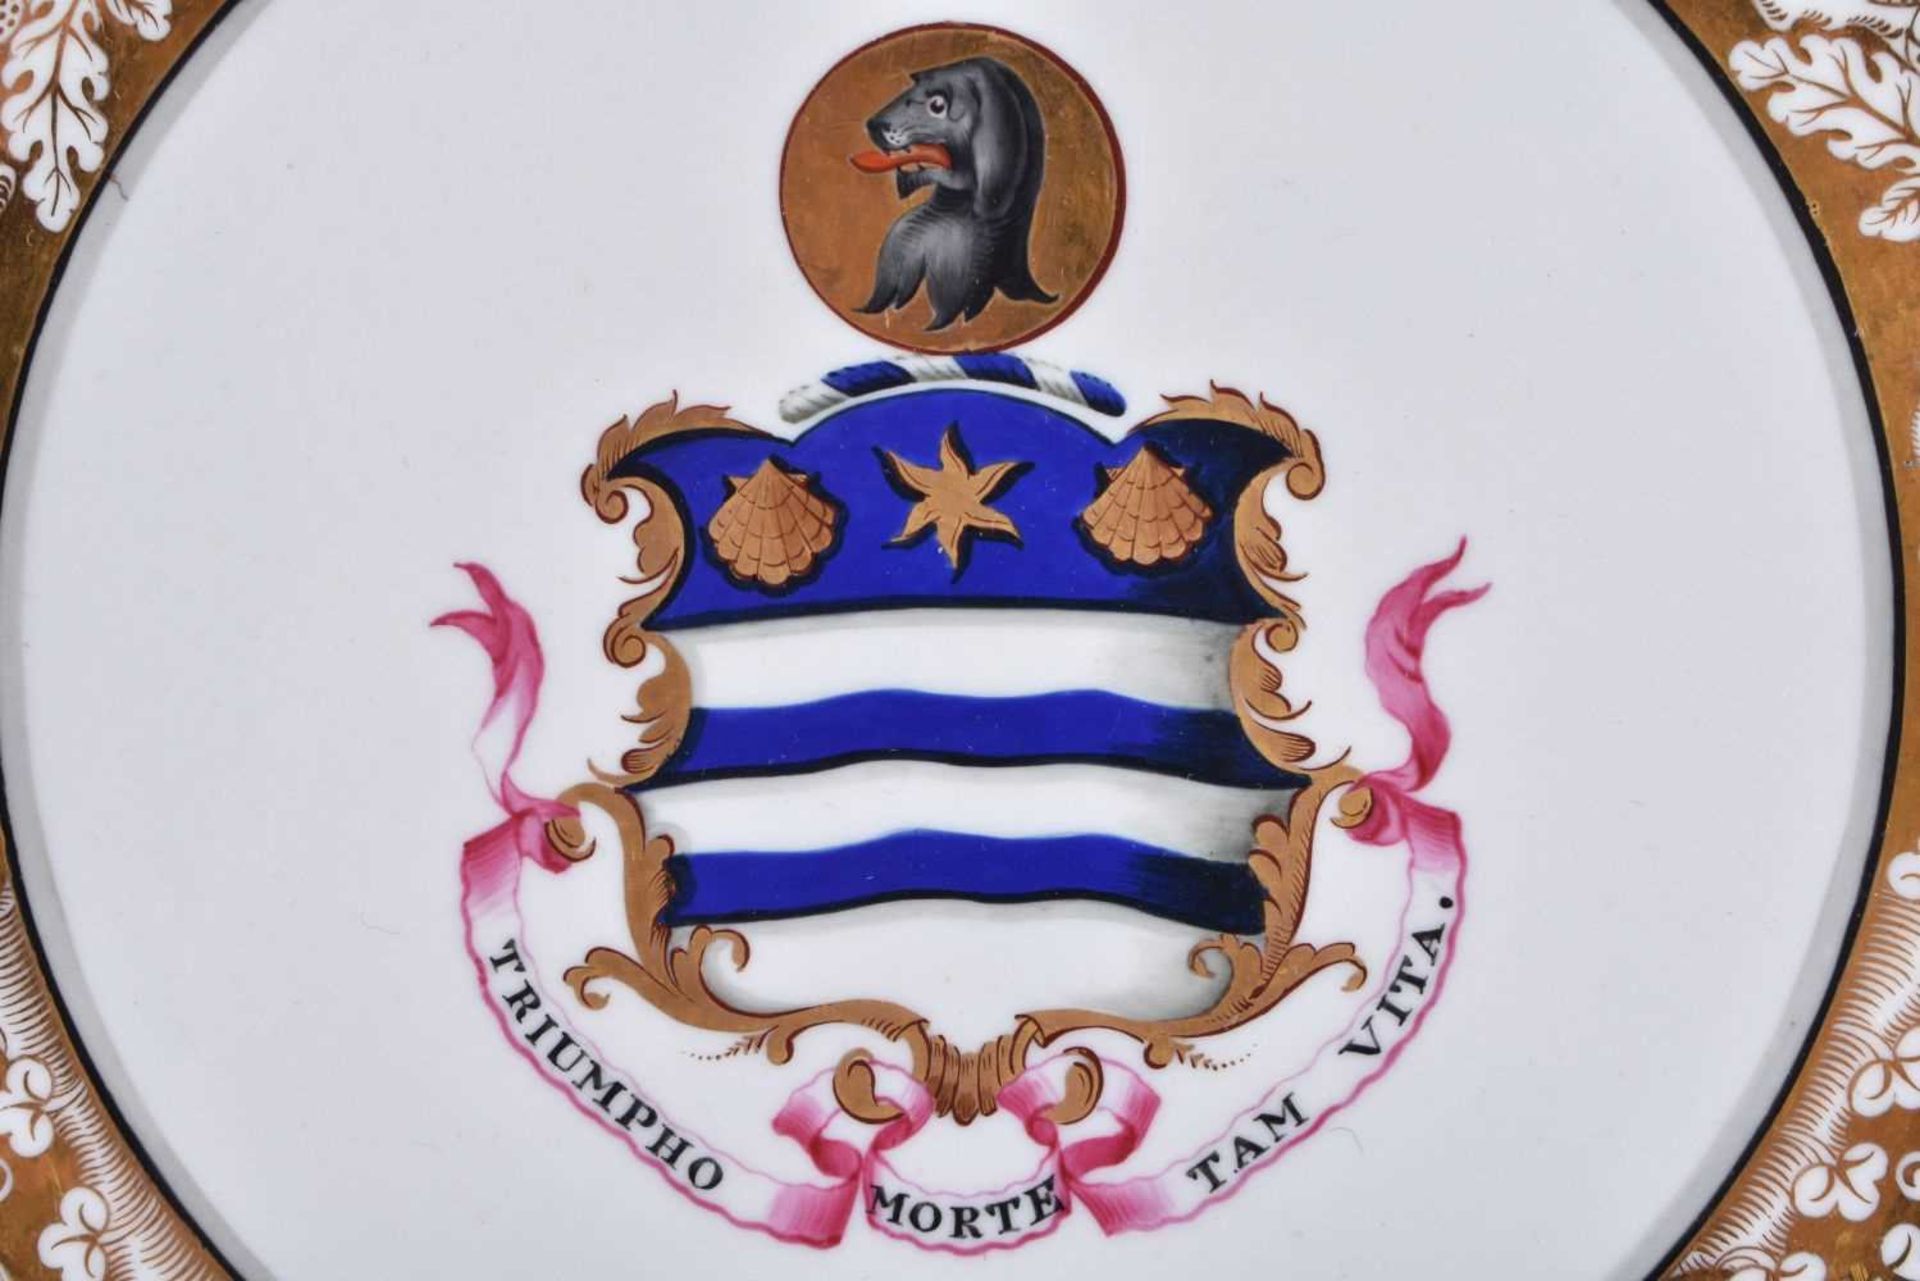 A FINE EARLY 19TH CENTURY CHAMBERLAINS WORCESTER ARMORIAL PLATE painted with a central dog crest, - Image 2 of 4